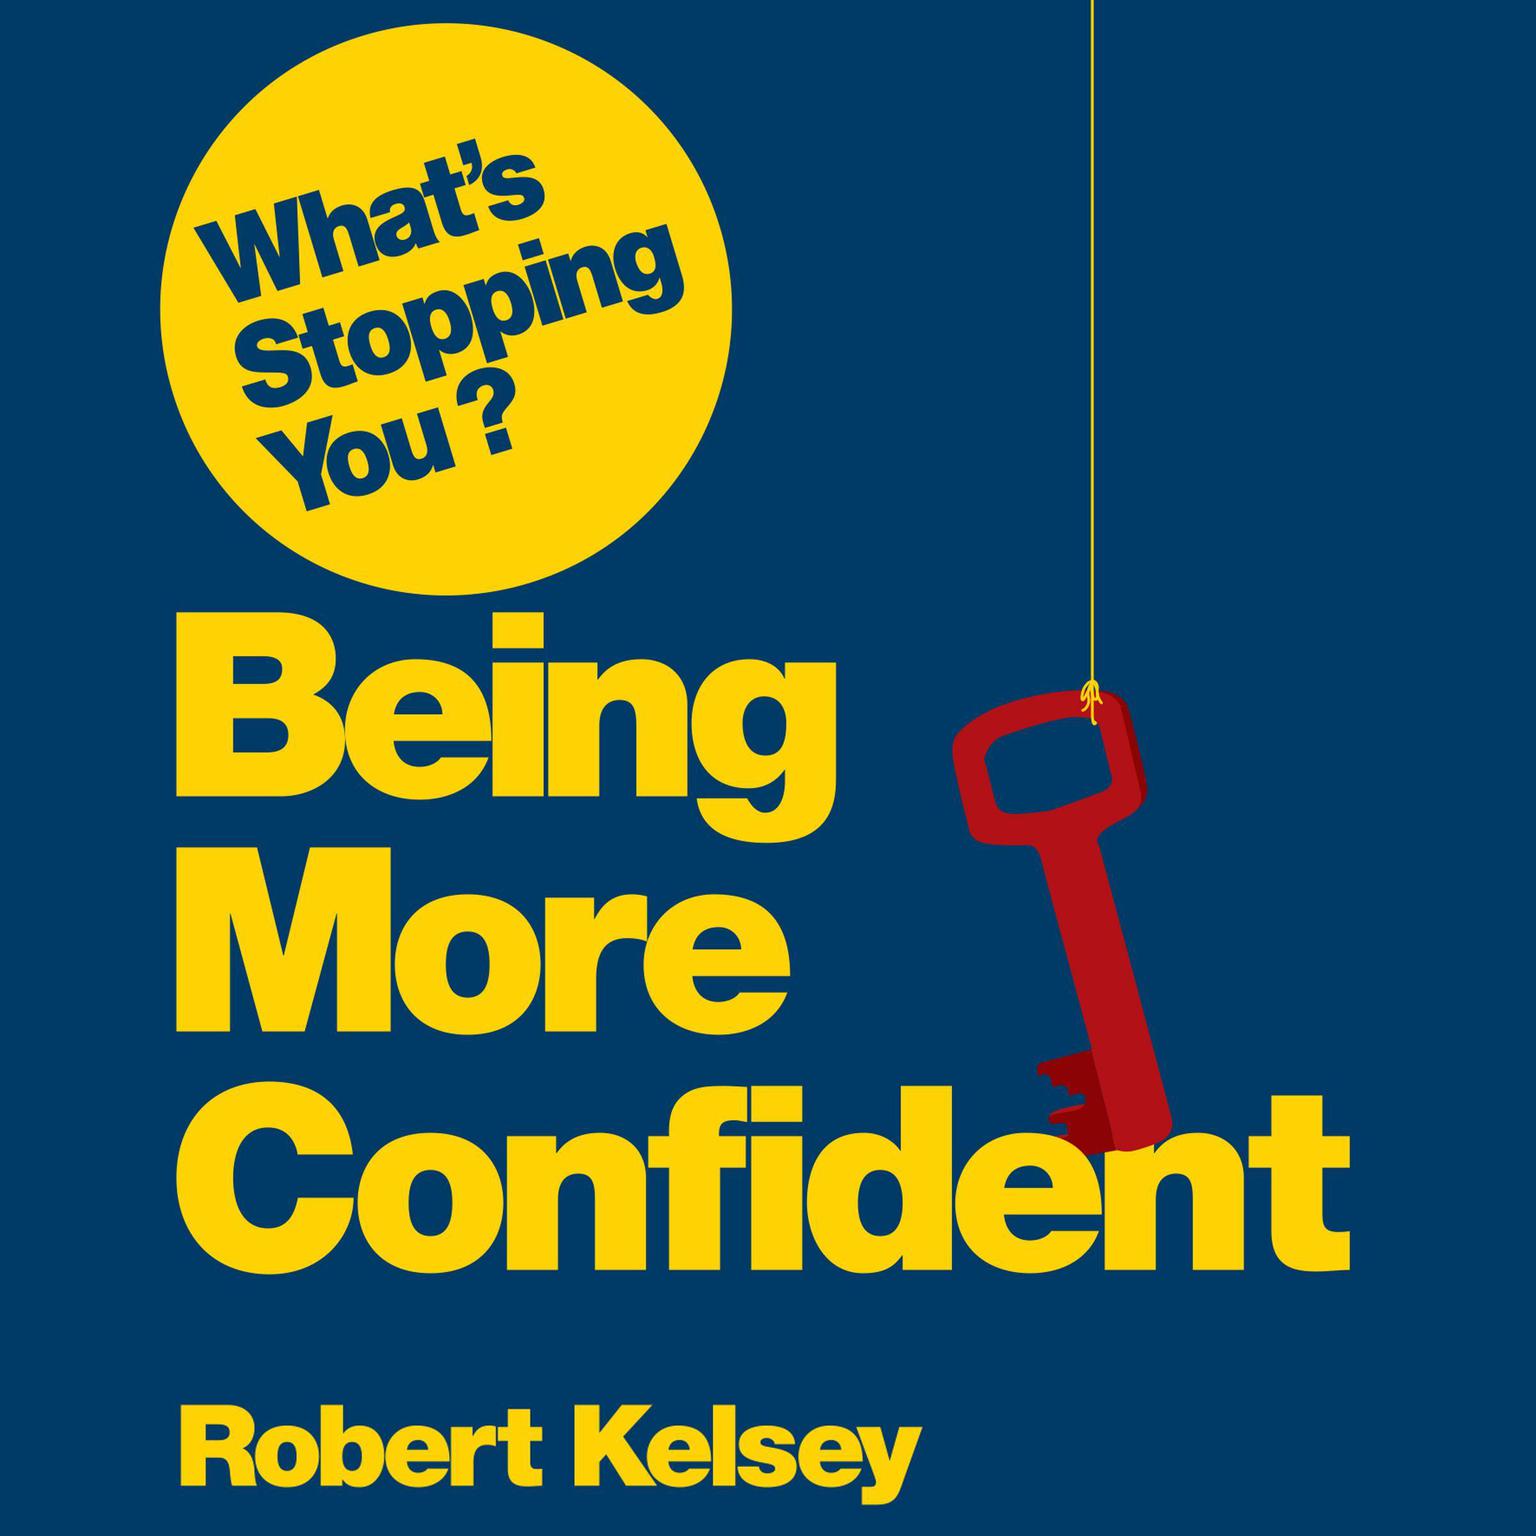 Whats Stopping You? Being More Confident: Why Smart People Can Lack Confidence and What You Can Do About It Audiobook, by Robert Kelsey